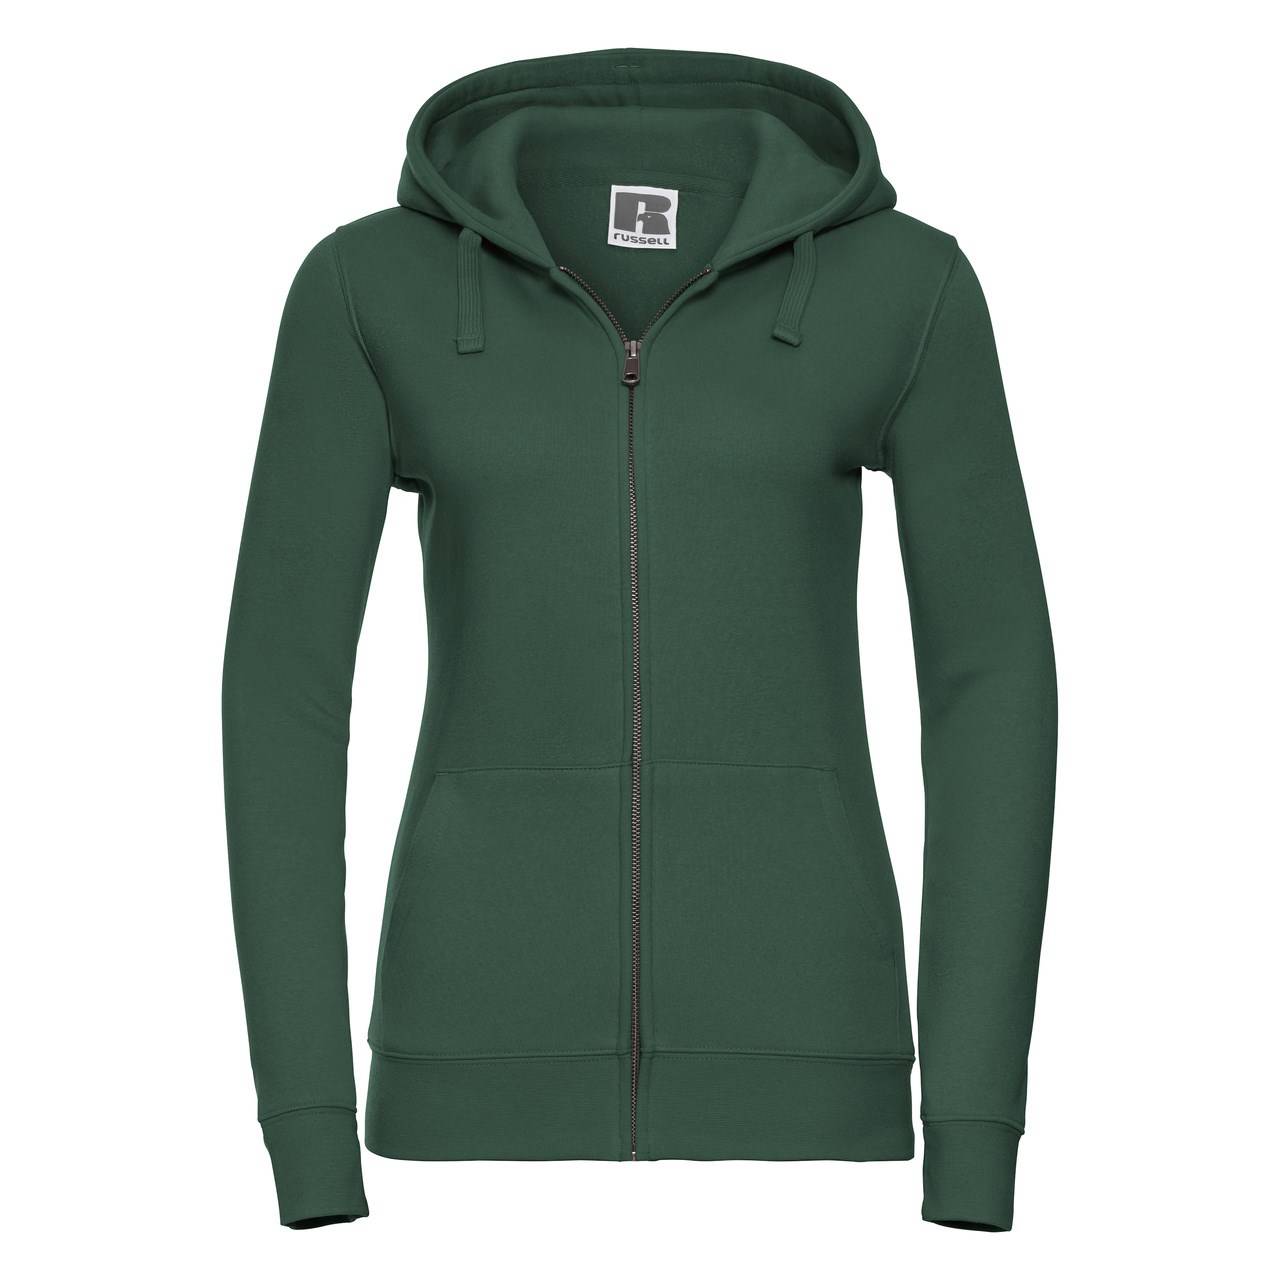 Levně Green women's hoodie with Authentic Russell zipper